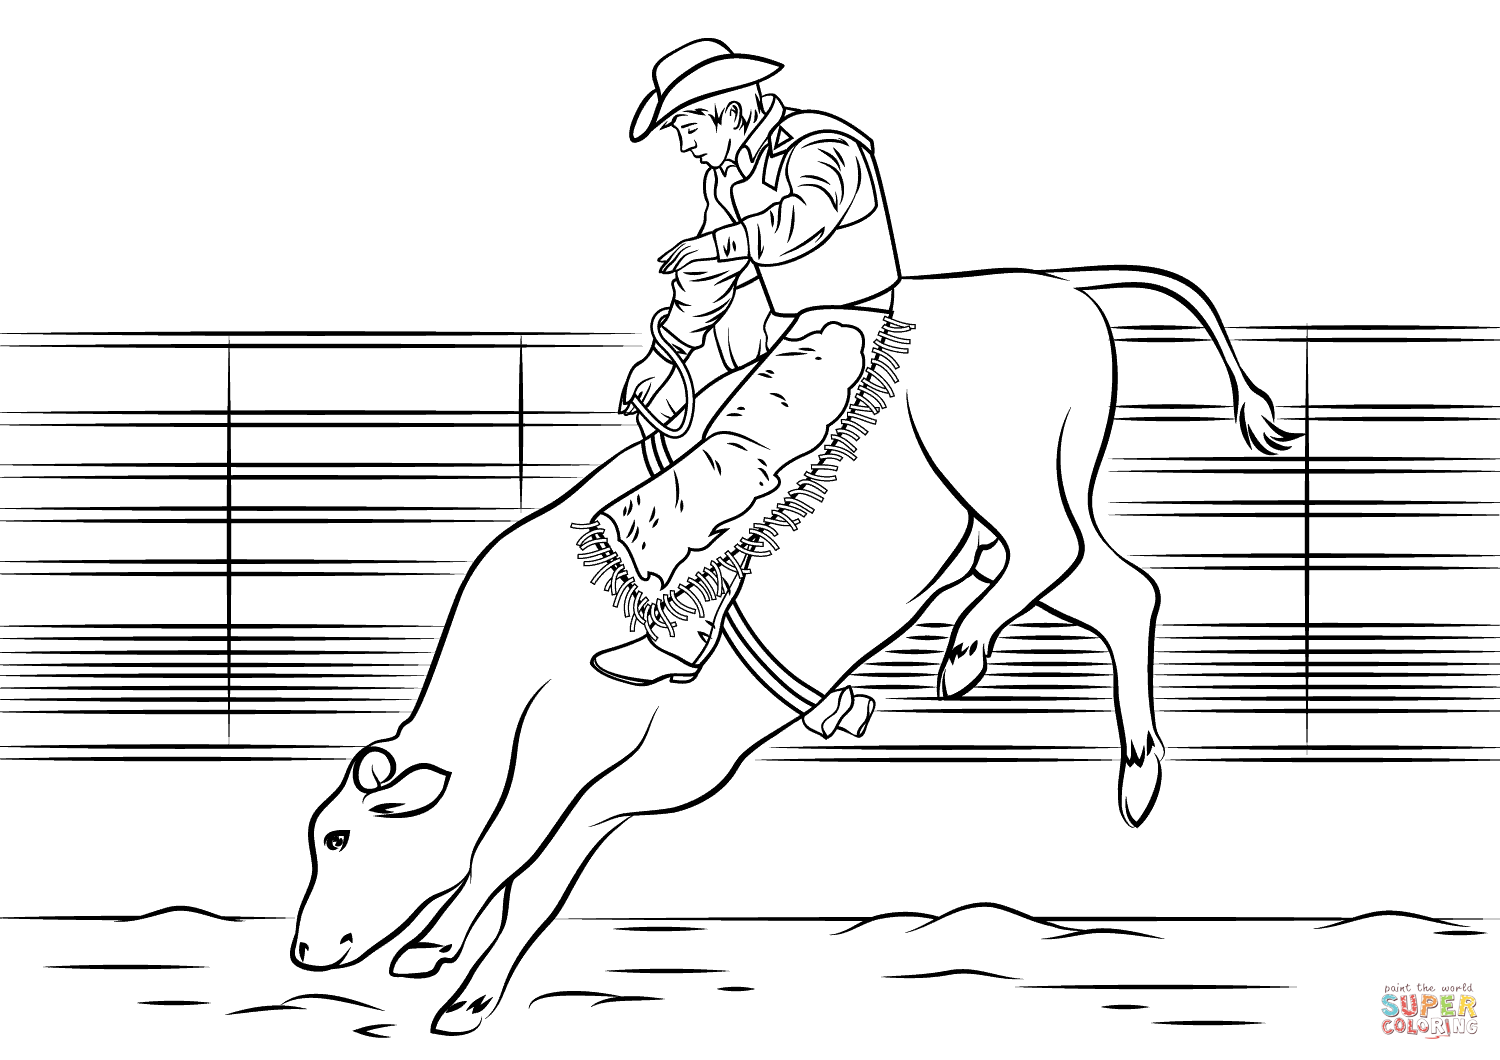 bull riding coloring pages - High Quality Coloring Pages